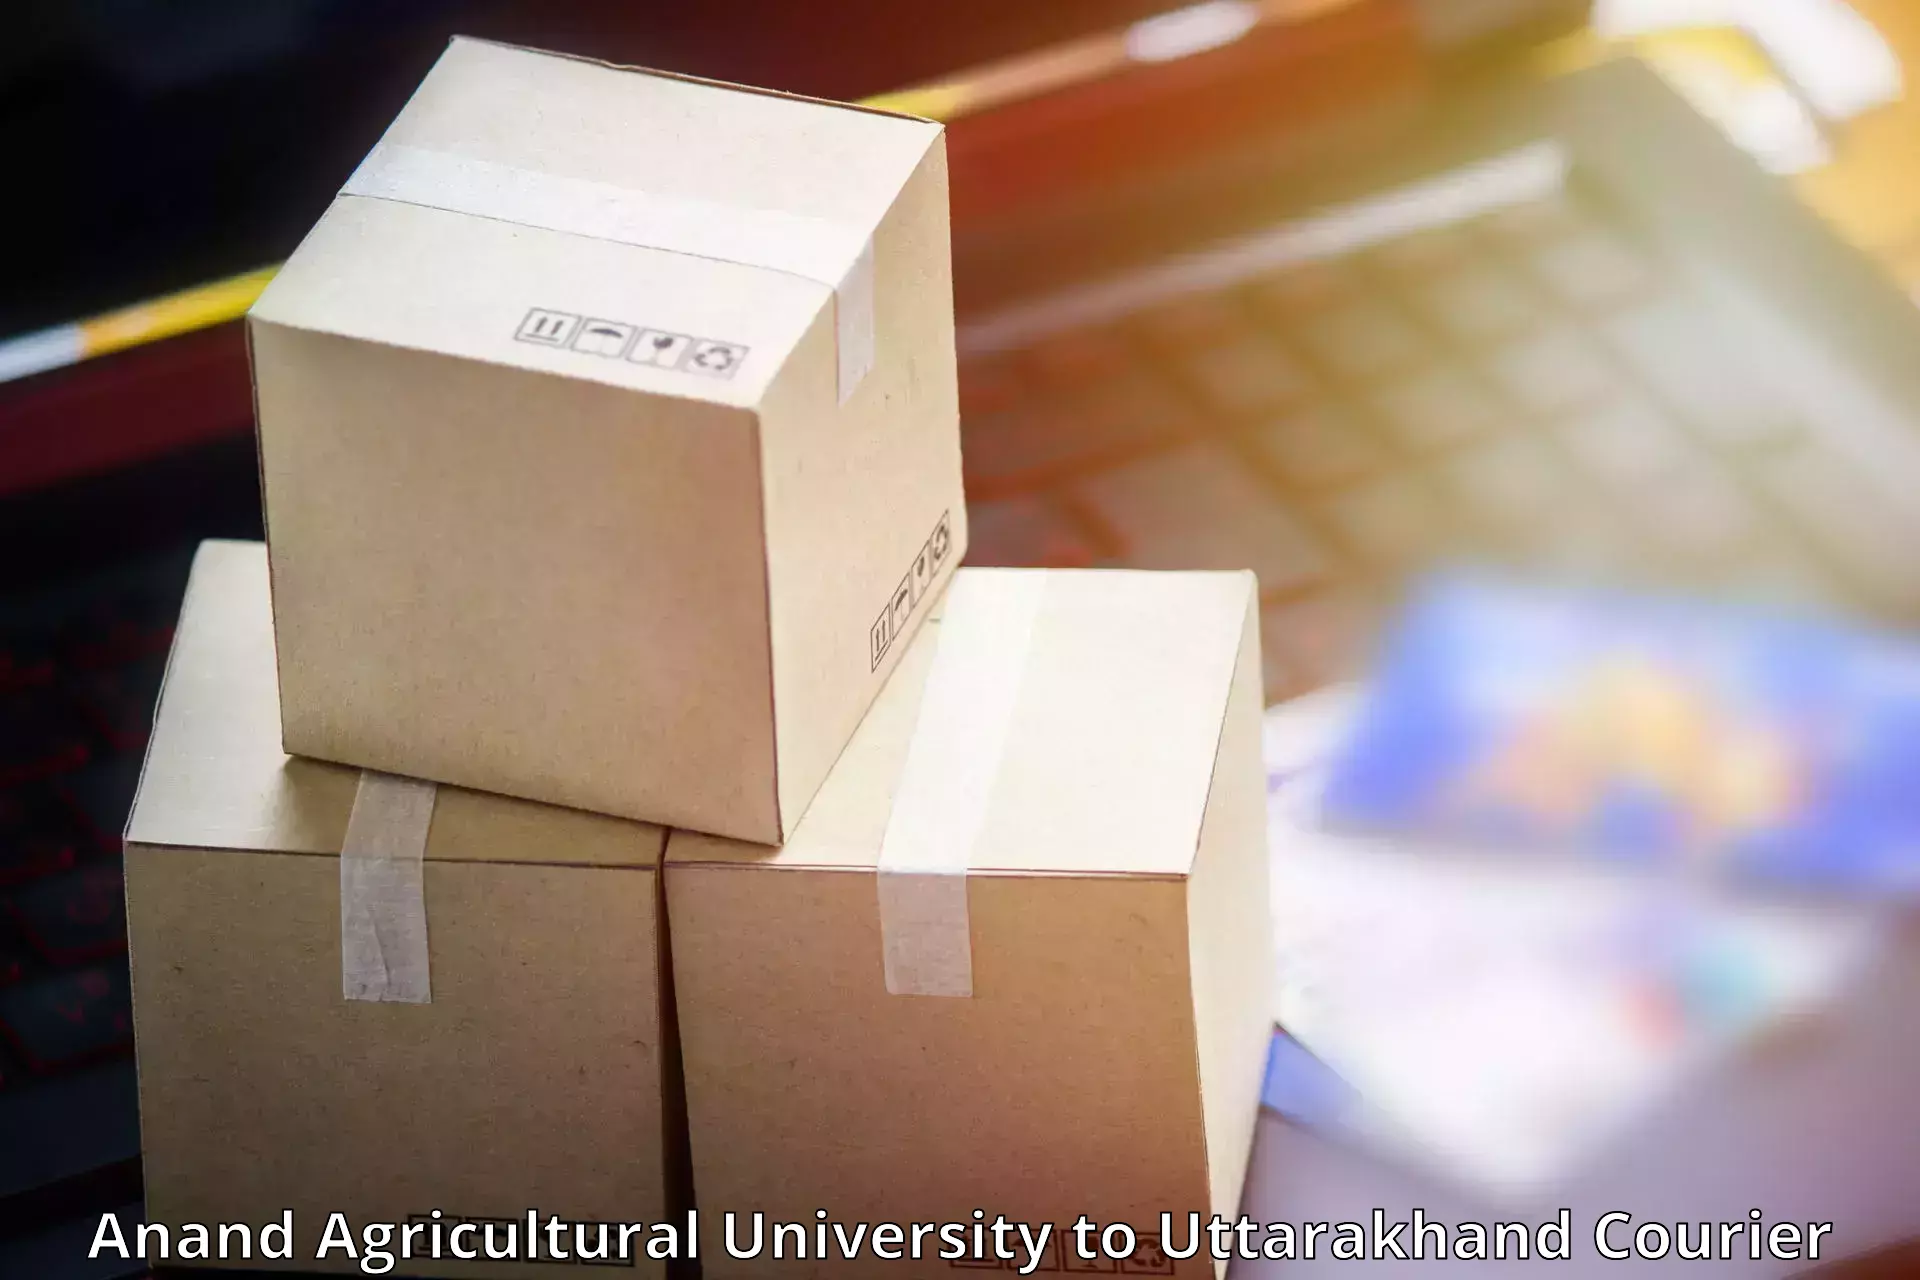 Long distance courier Anand Agricultural University to Kotdwara